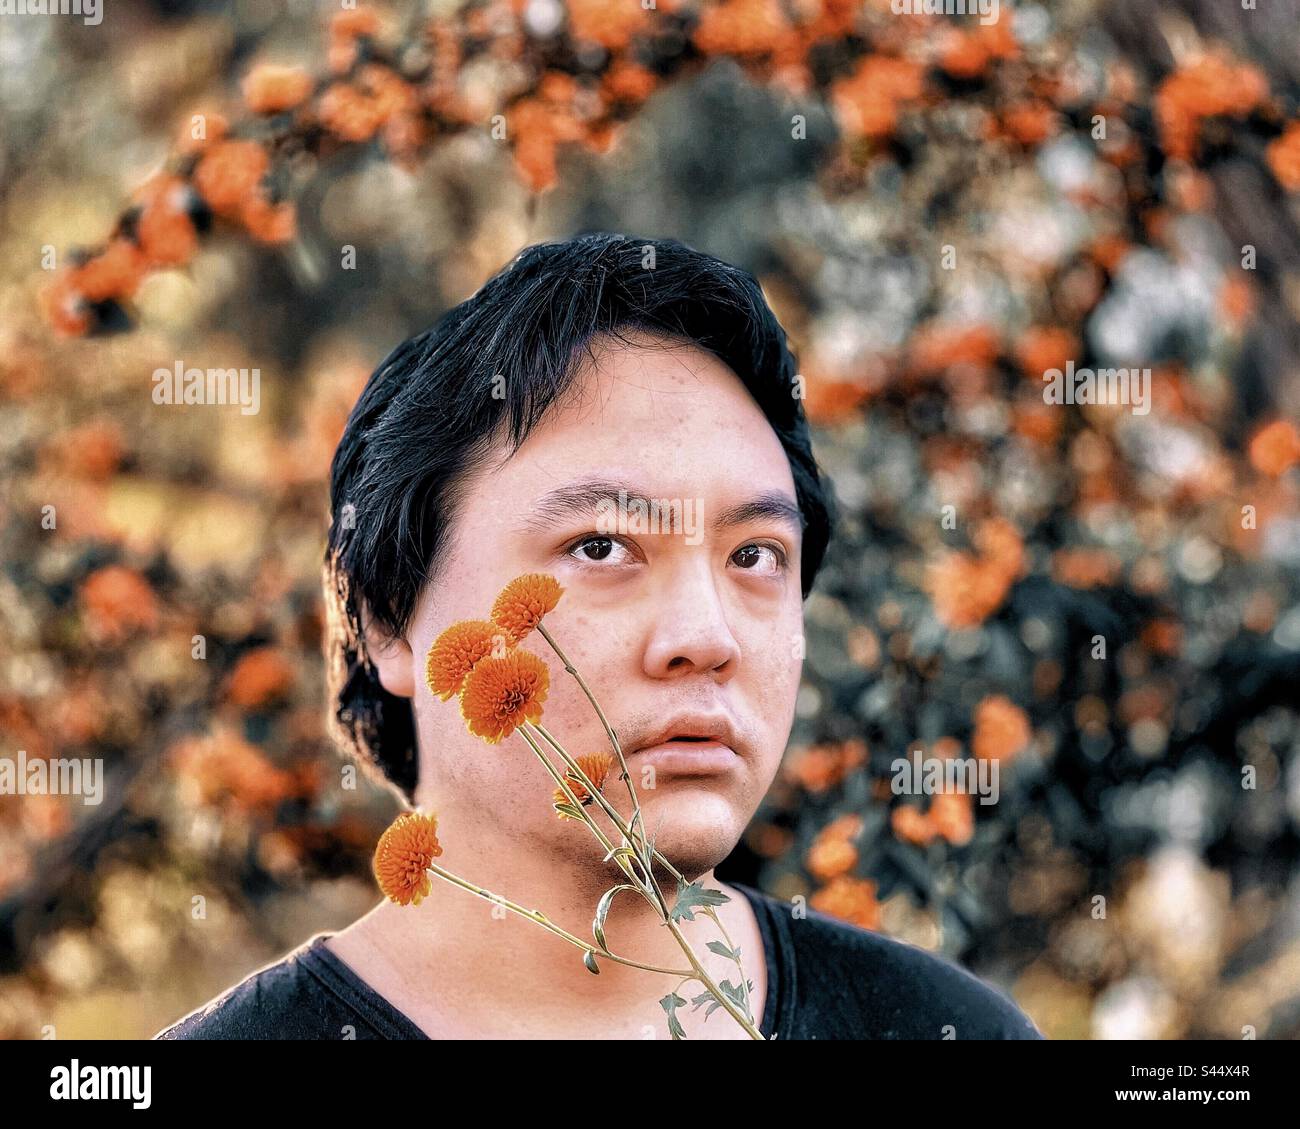 Close-up portrait of young Asian man with orange chrysanthemum flowers against orange Cotoneaster berry trees. Focus on foreground. Autumn themes. Stock Photo